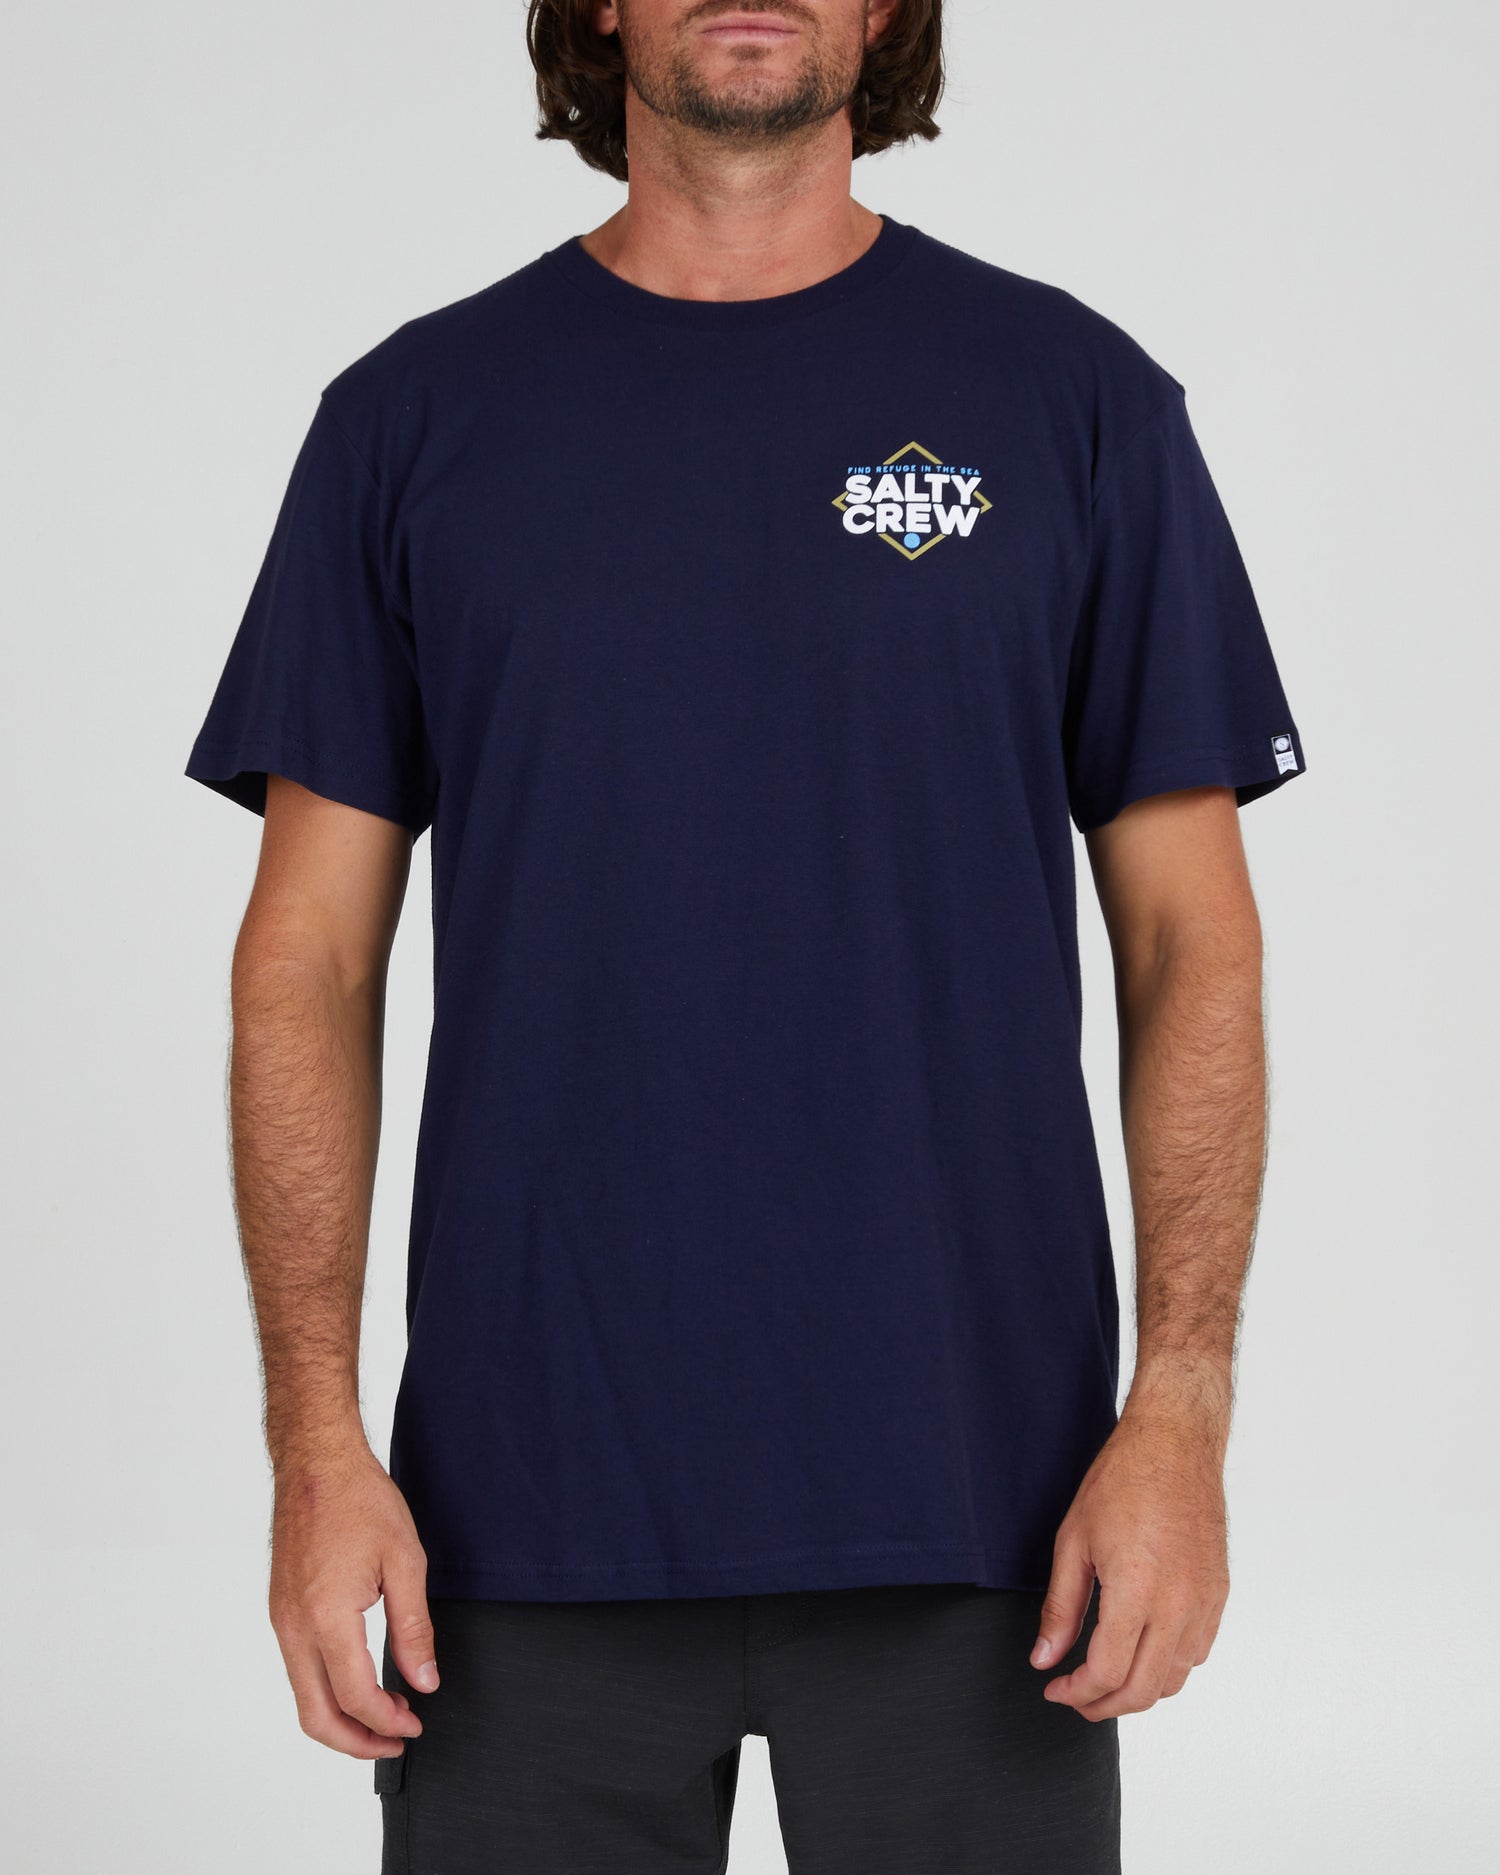 On body front of the No Slack Navy S/S Standard Tee